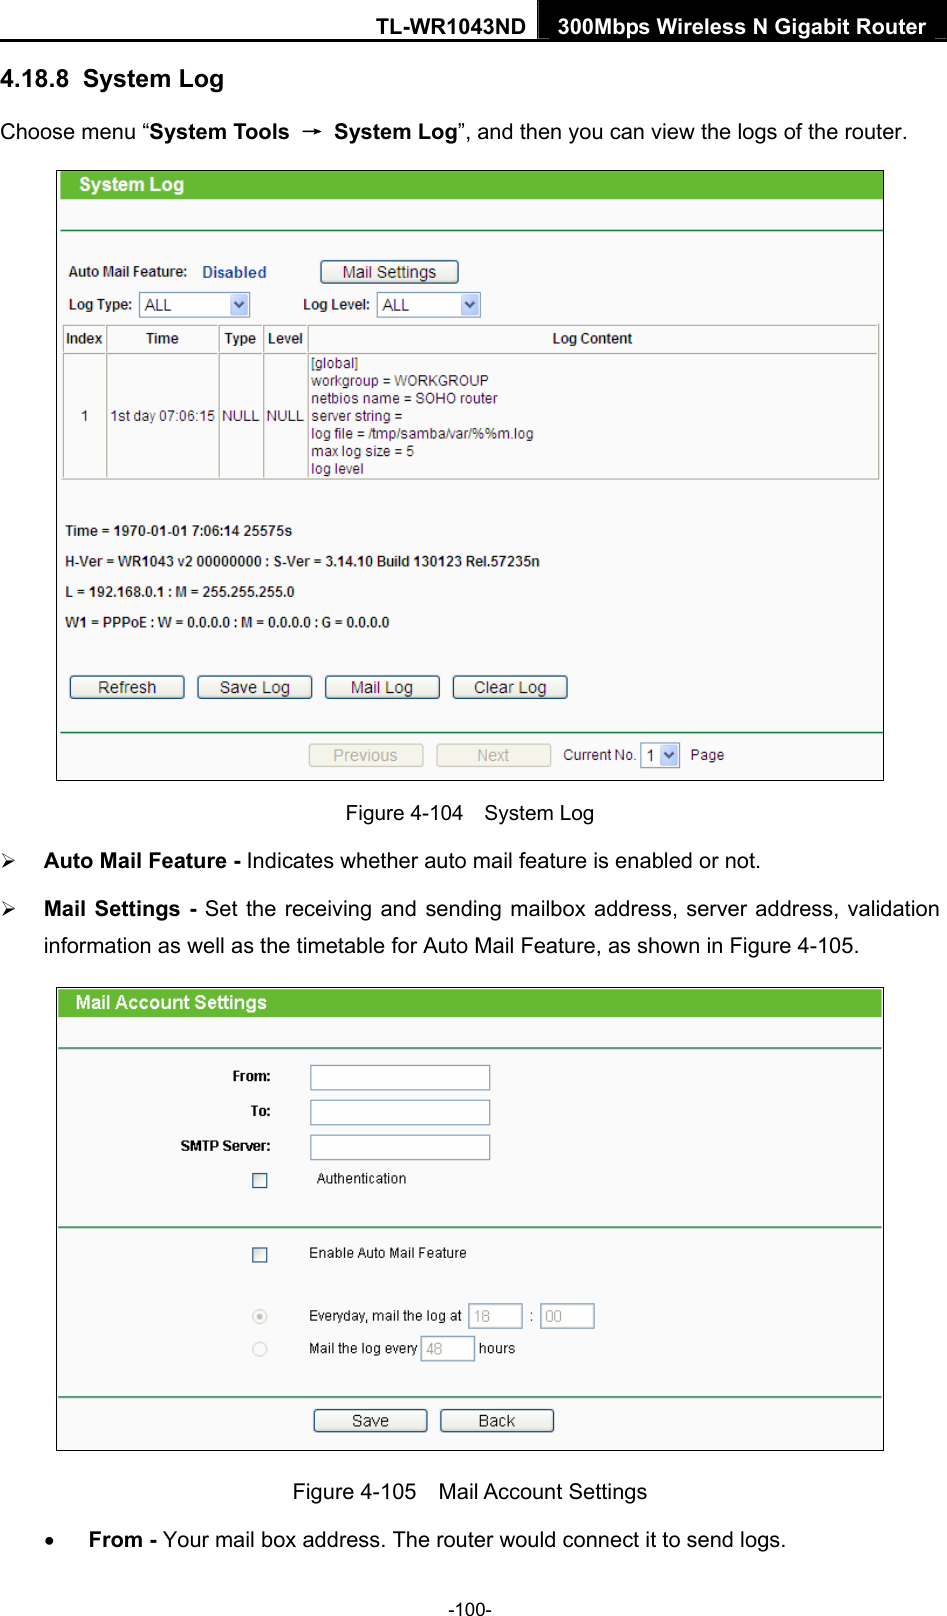 TL-WR1043ND 300Mbps Wireless N Gigabit Router  4.18.8  System Log Choose menu “System Tools  → System Log”, and then you can view the logs of the router.  Figure 4-104  System Log ¾ Auto Mail Feature - Indicates whether auto mail feature is enabled or not.   ¾ Mail Settings - Set the receiving and sending mailbox address, server address, validation information as well as the timetable for Auto Mail Feature, as shown in Figure 4-105.  Figure 4-105  Mail Account Settings • From - Your mail box address. The router would connect it to send logs. -100- 